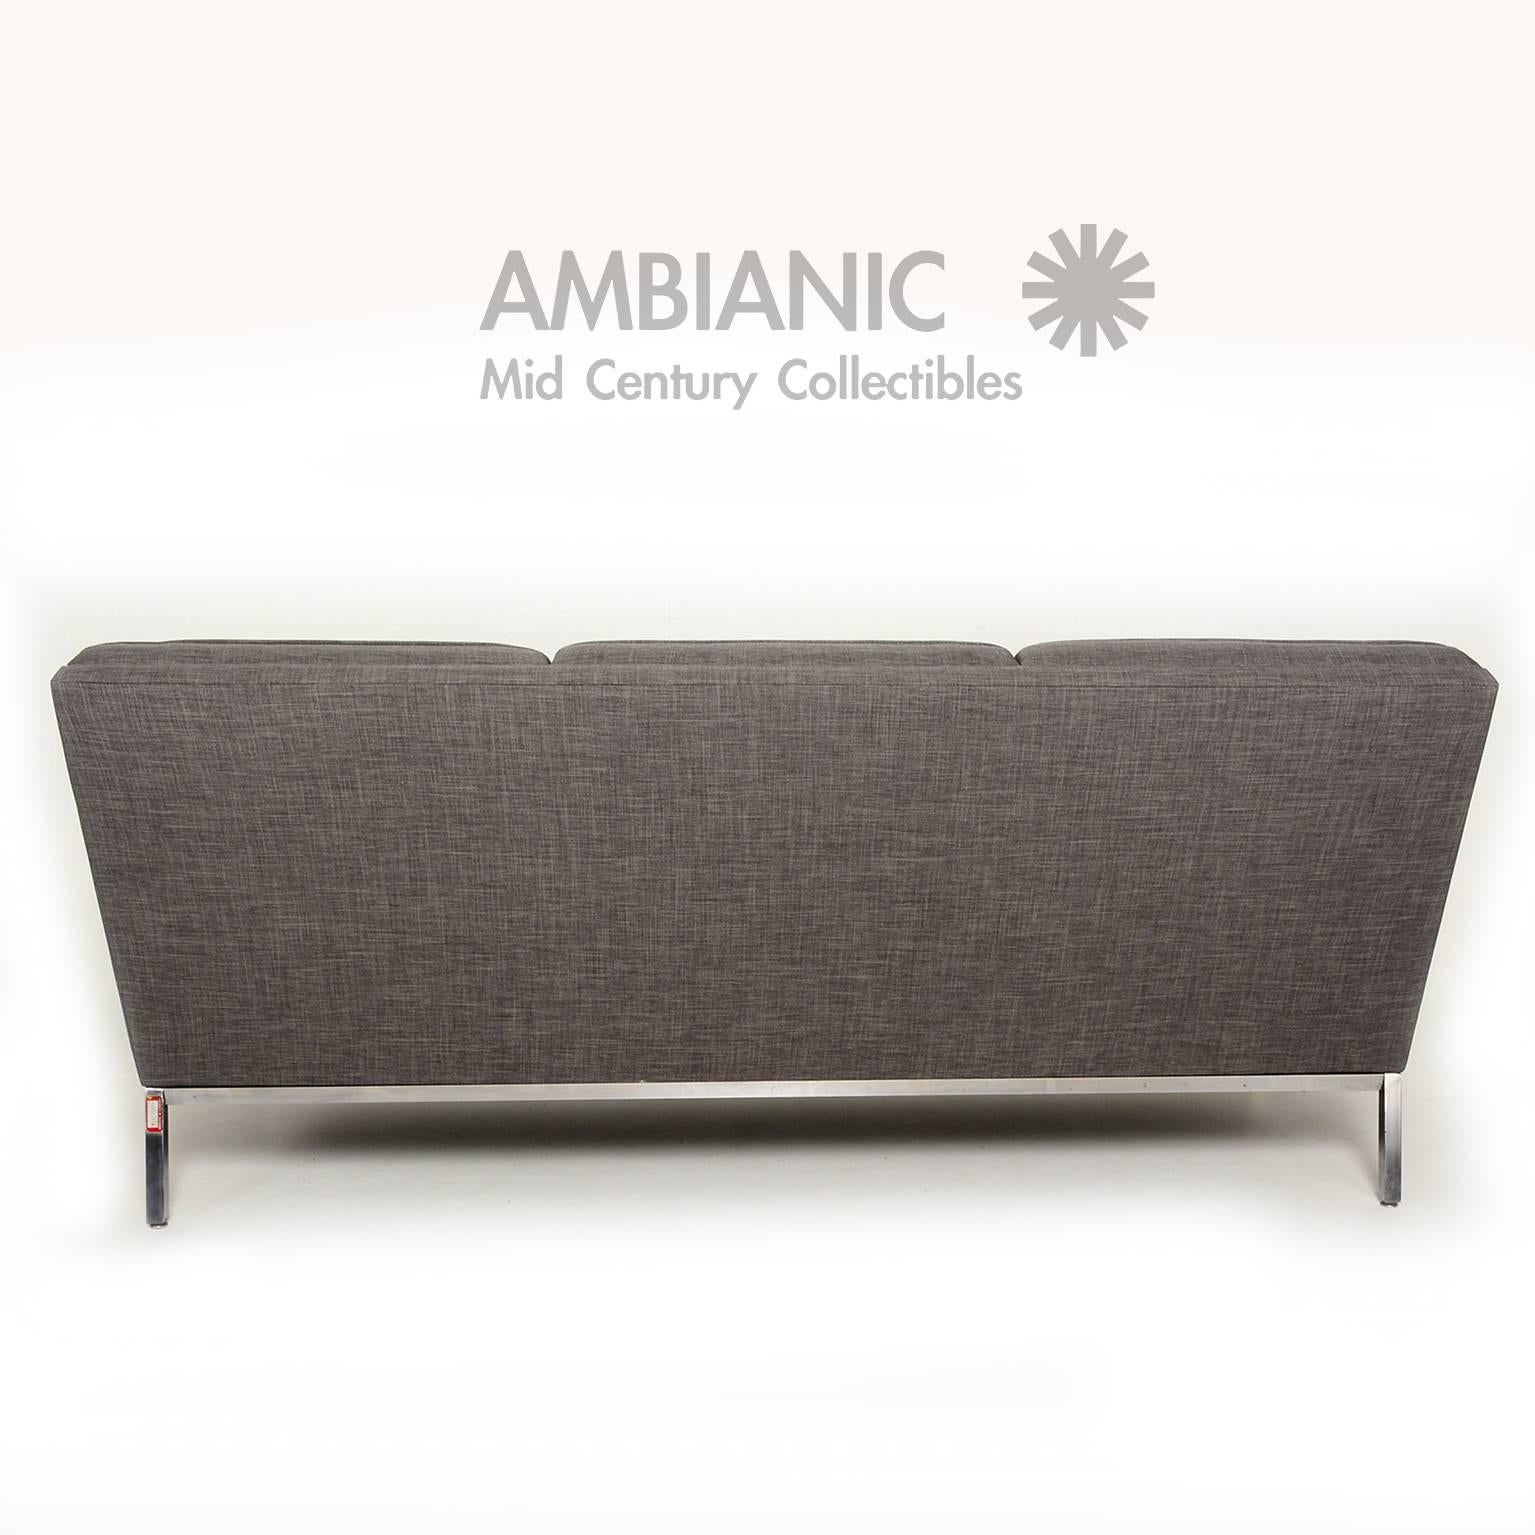 For your consideration a three-seat sofa designed by Steelcase.

Upholstered in grey linen/cotton material. Mounted in original chrome-plated base. 
New upholstery, seating comfort is very good.


Dimensions:
31" D x 72" W x